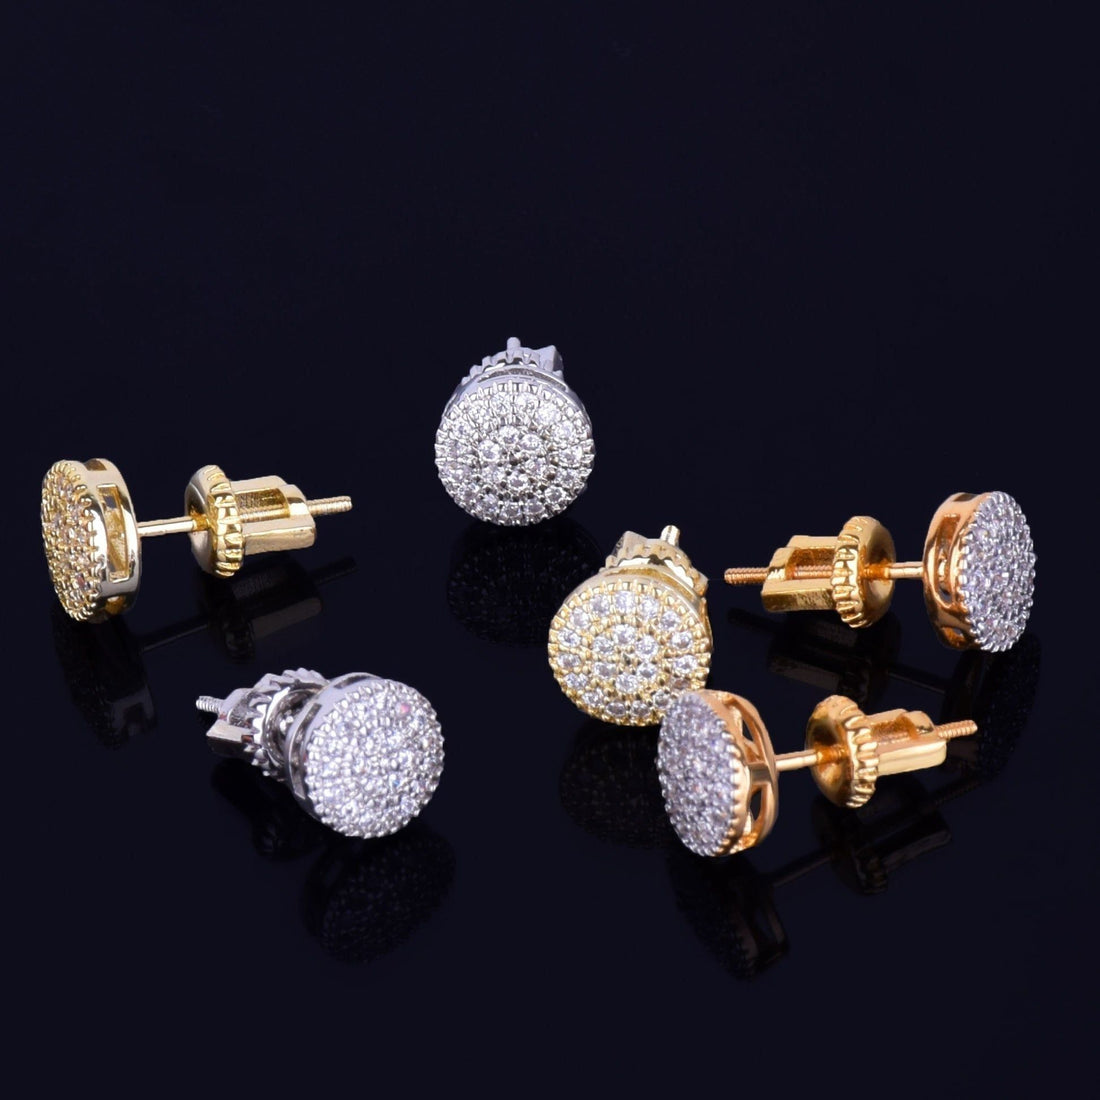 8MM Golden Mini Rounded Stud Earring Charm Jewelry ECJSOL06 Cubic Zircon - Touchy Style .